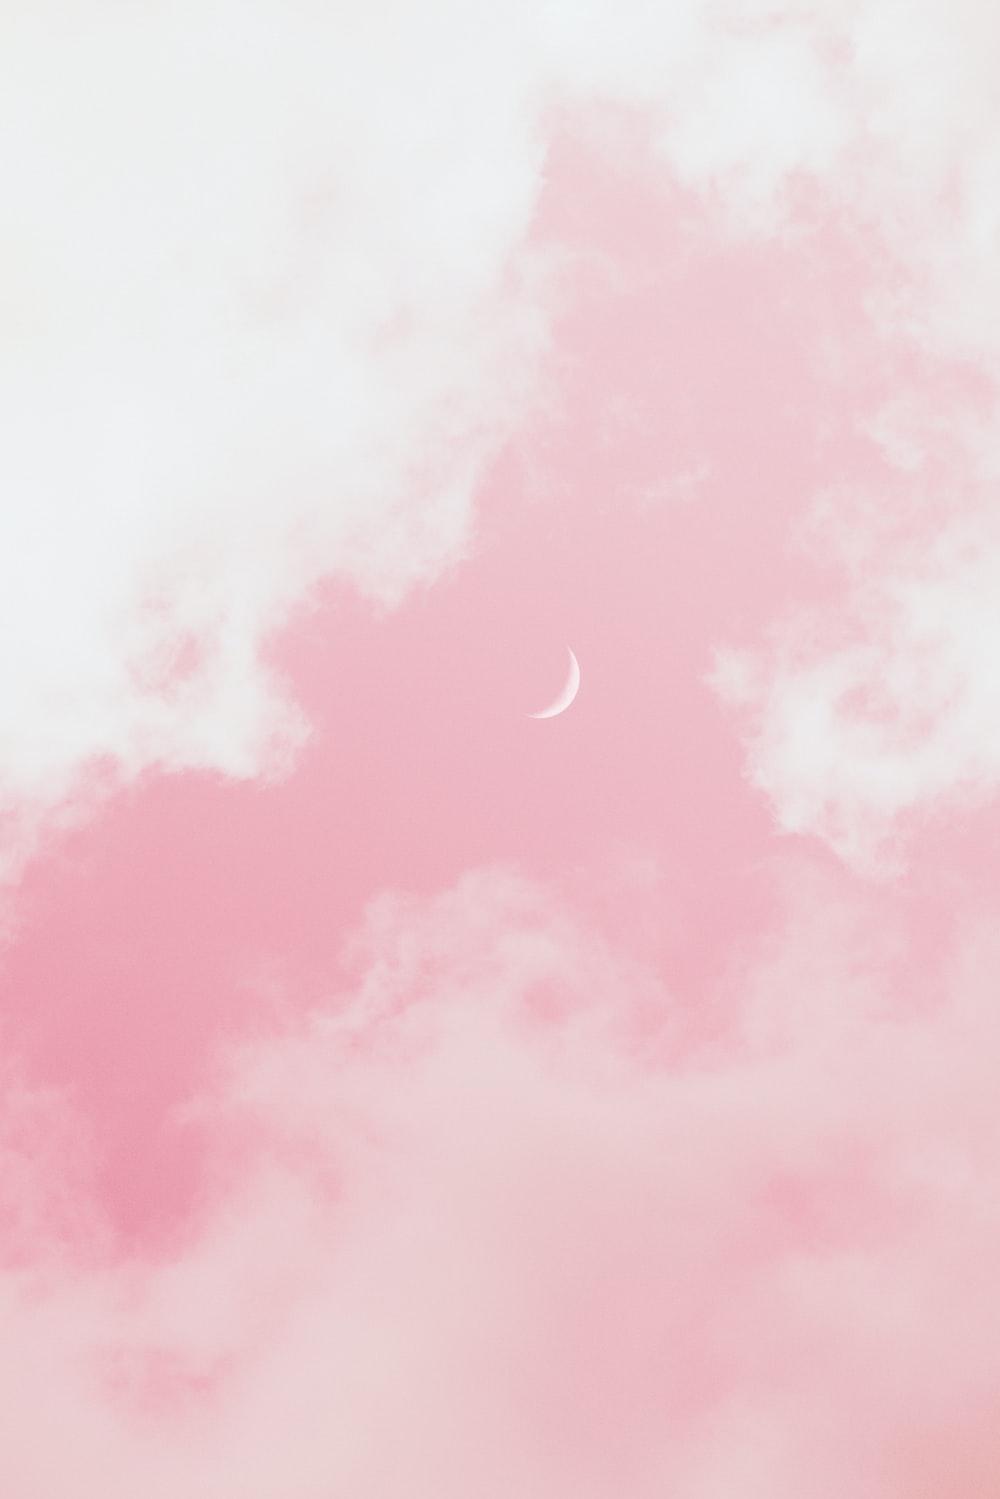 Pink Aesthetic Pictures Image